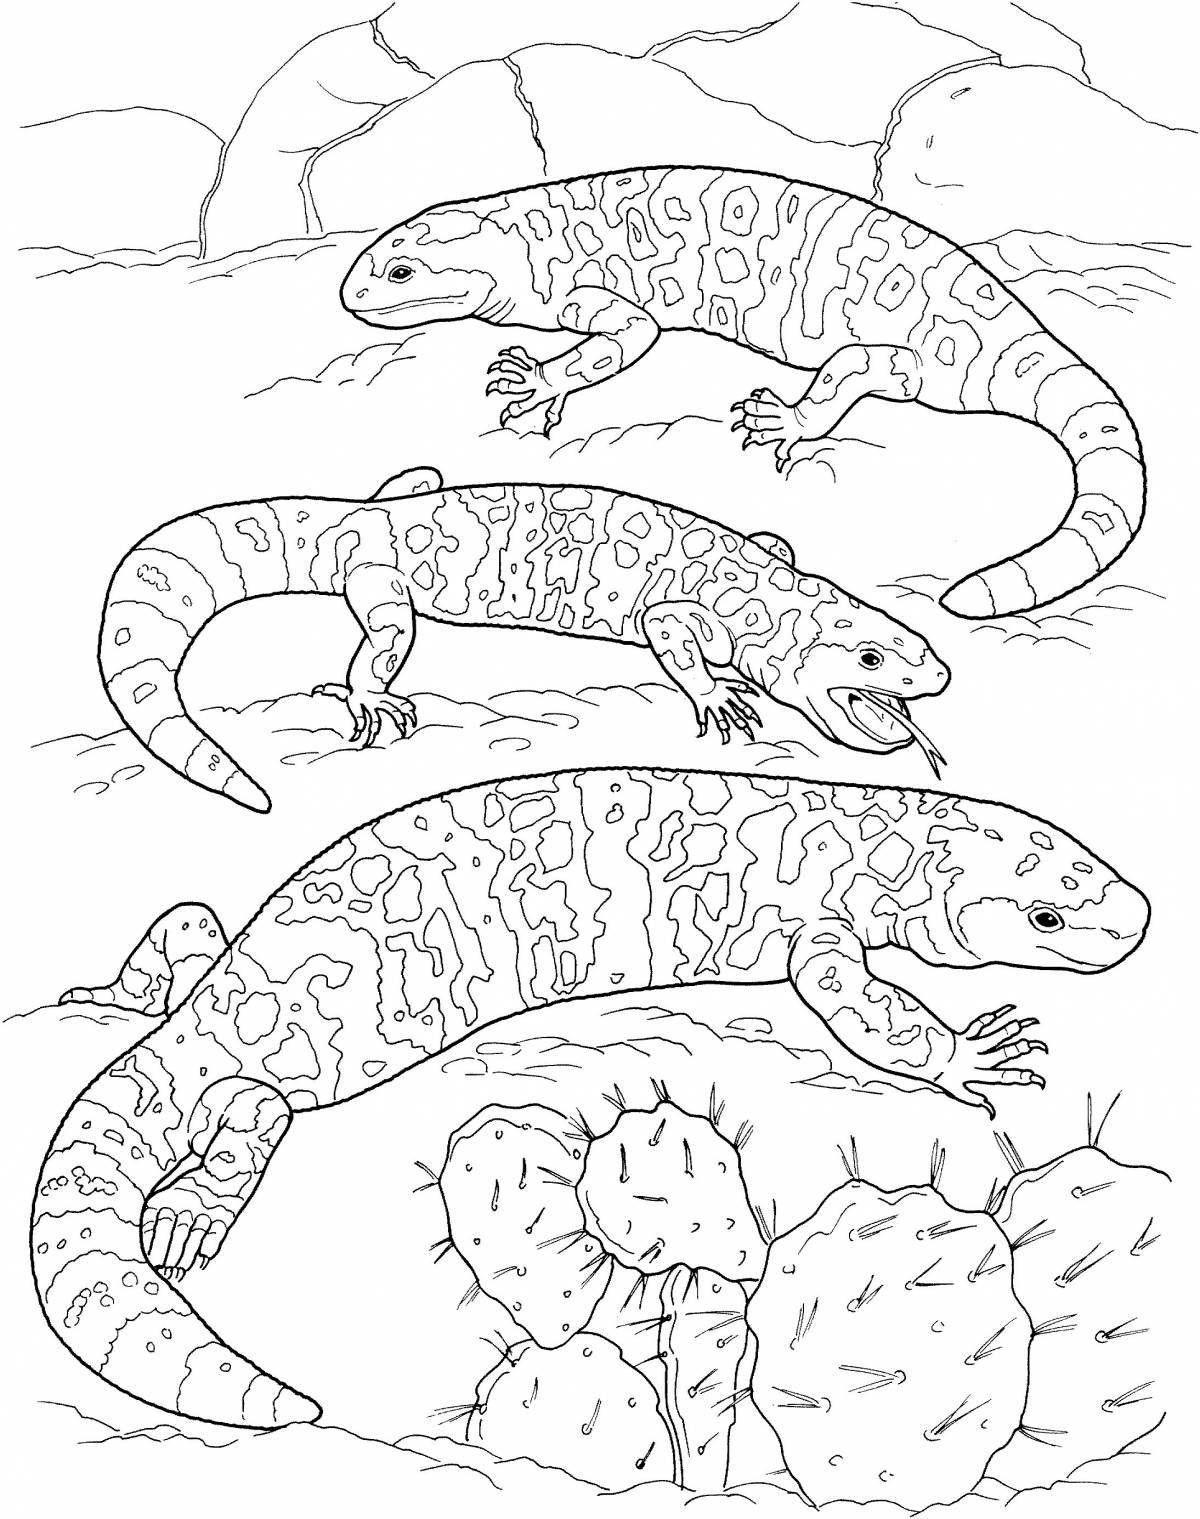 Amazing desert animal coloring pages